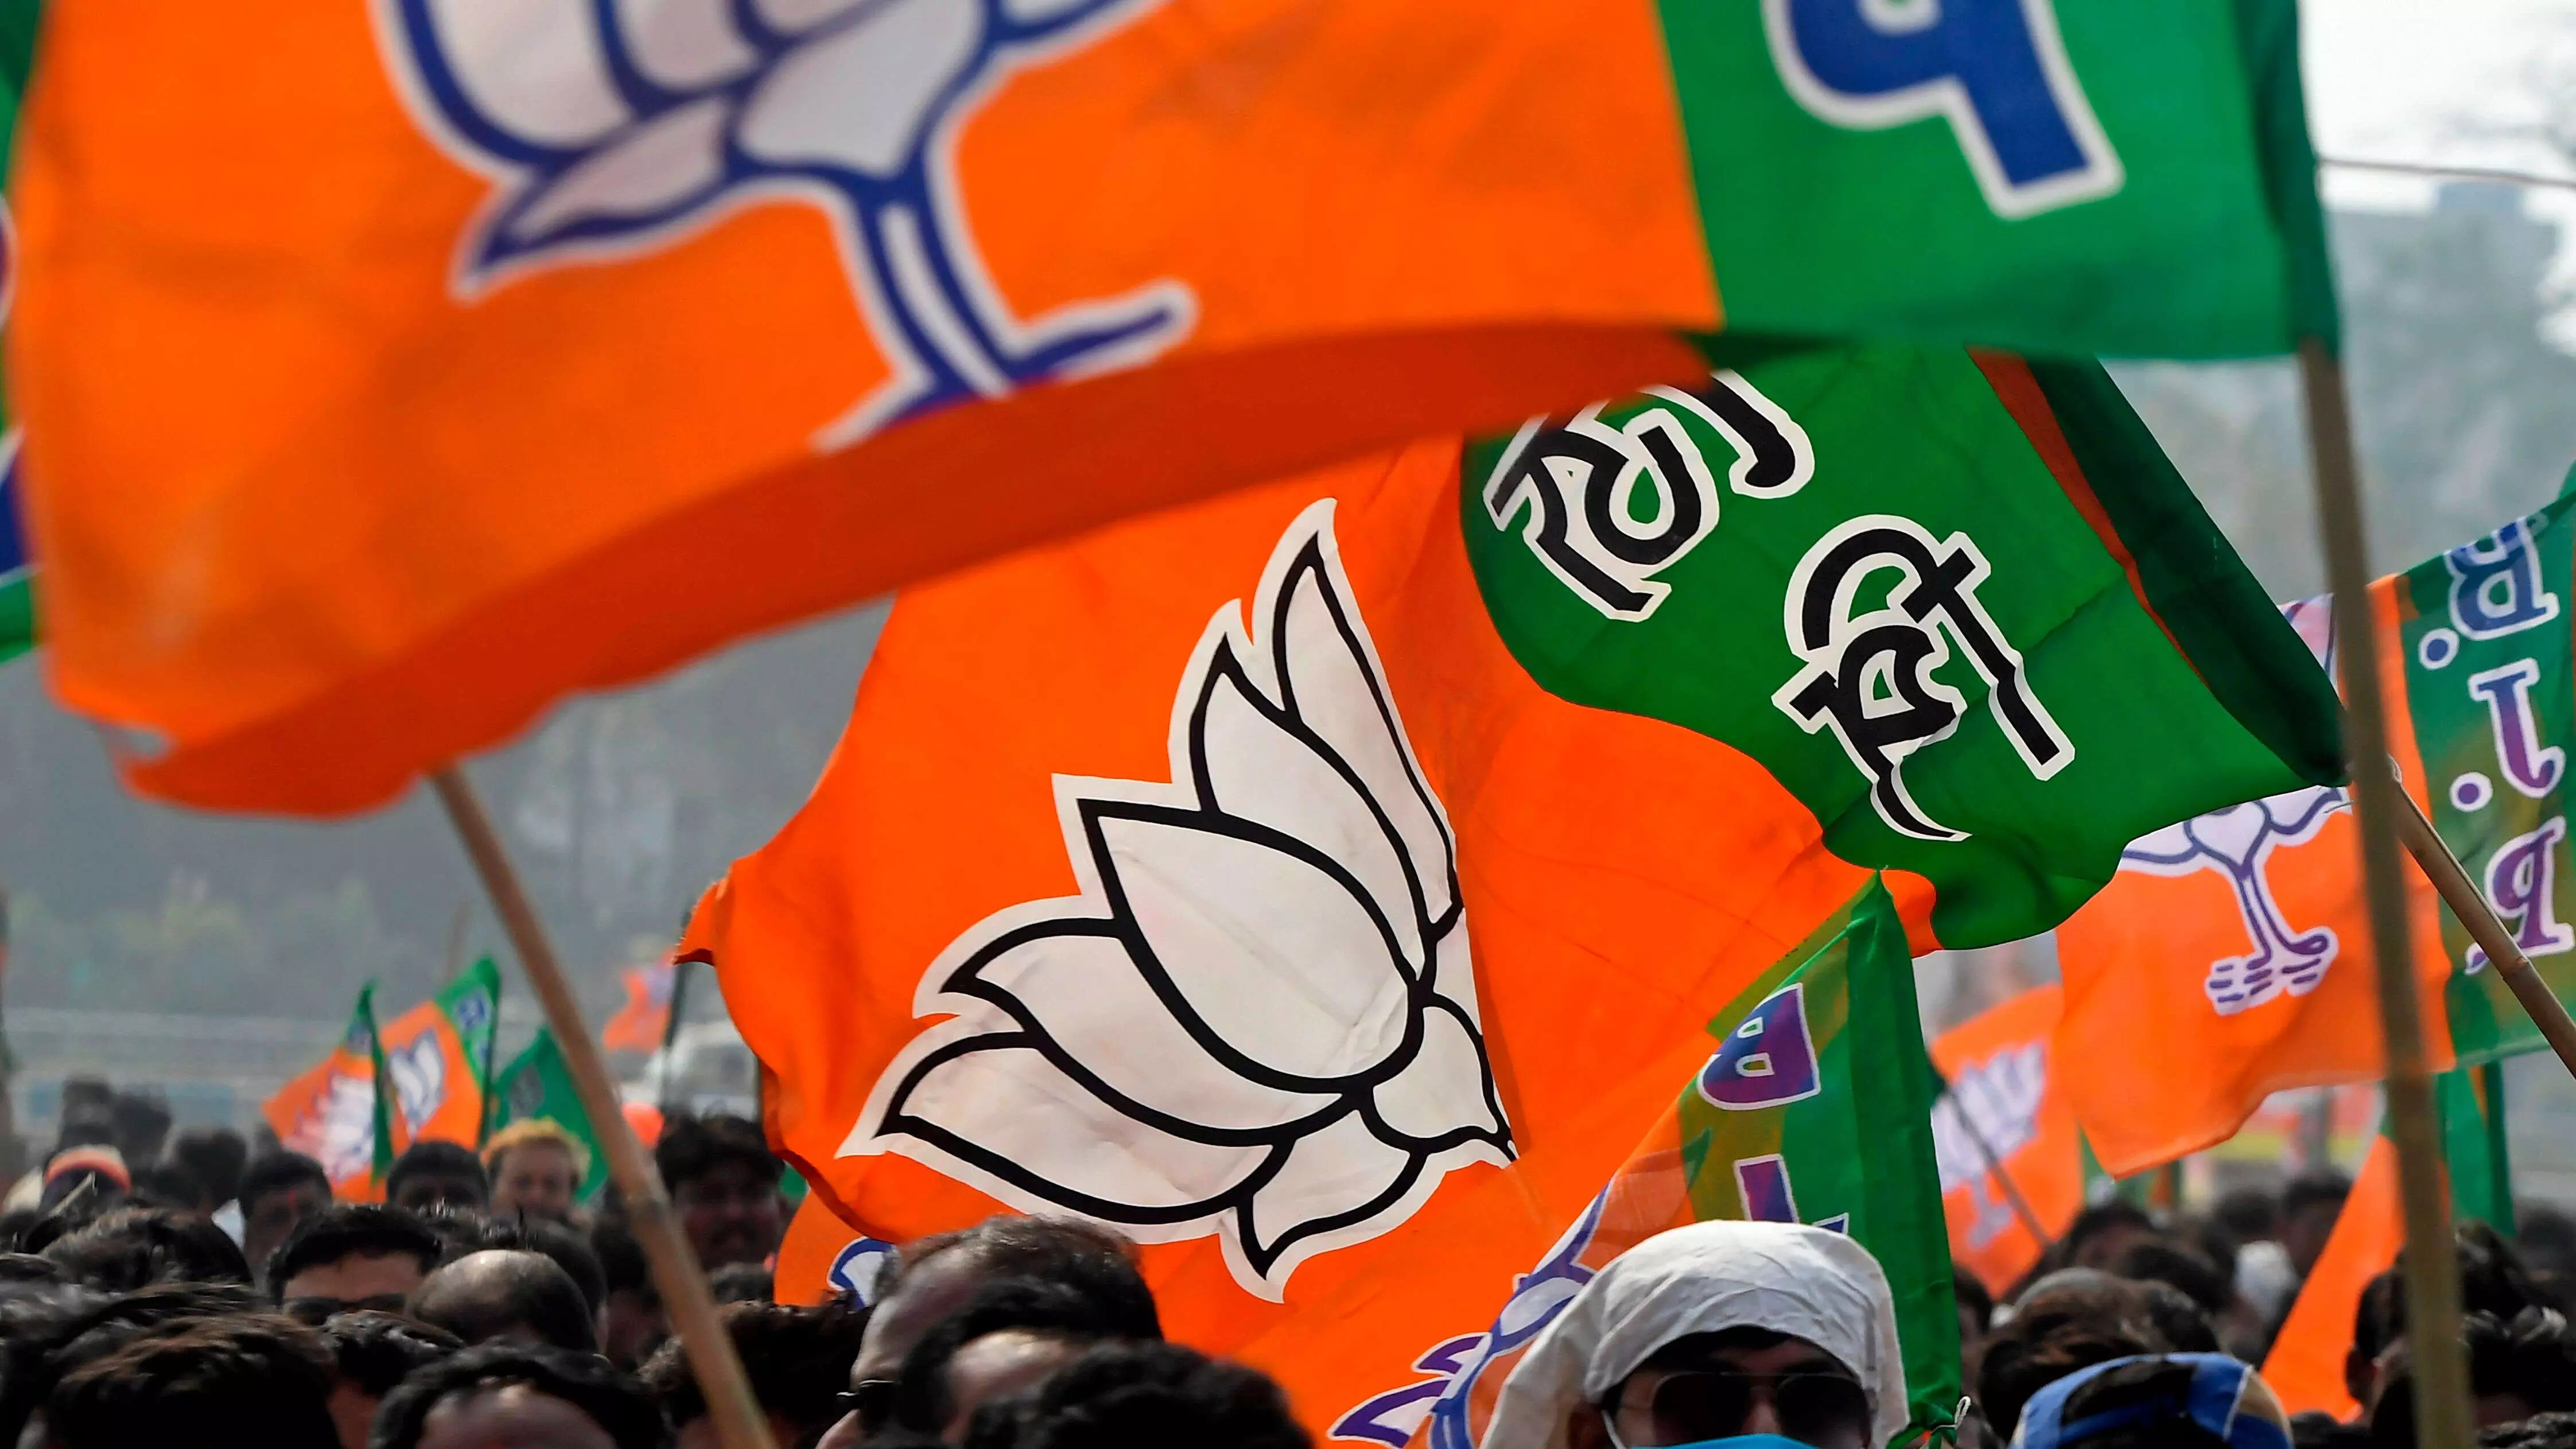 BJP gears up to contest all 60 Meghalaya seats, 20 seats in Nagaland